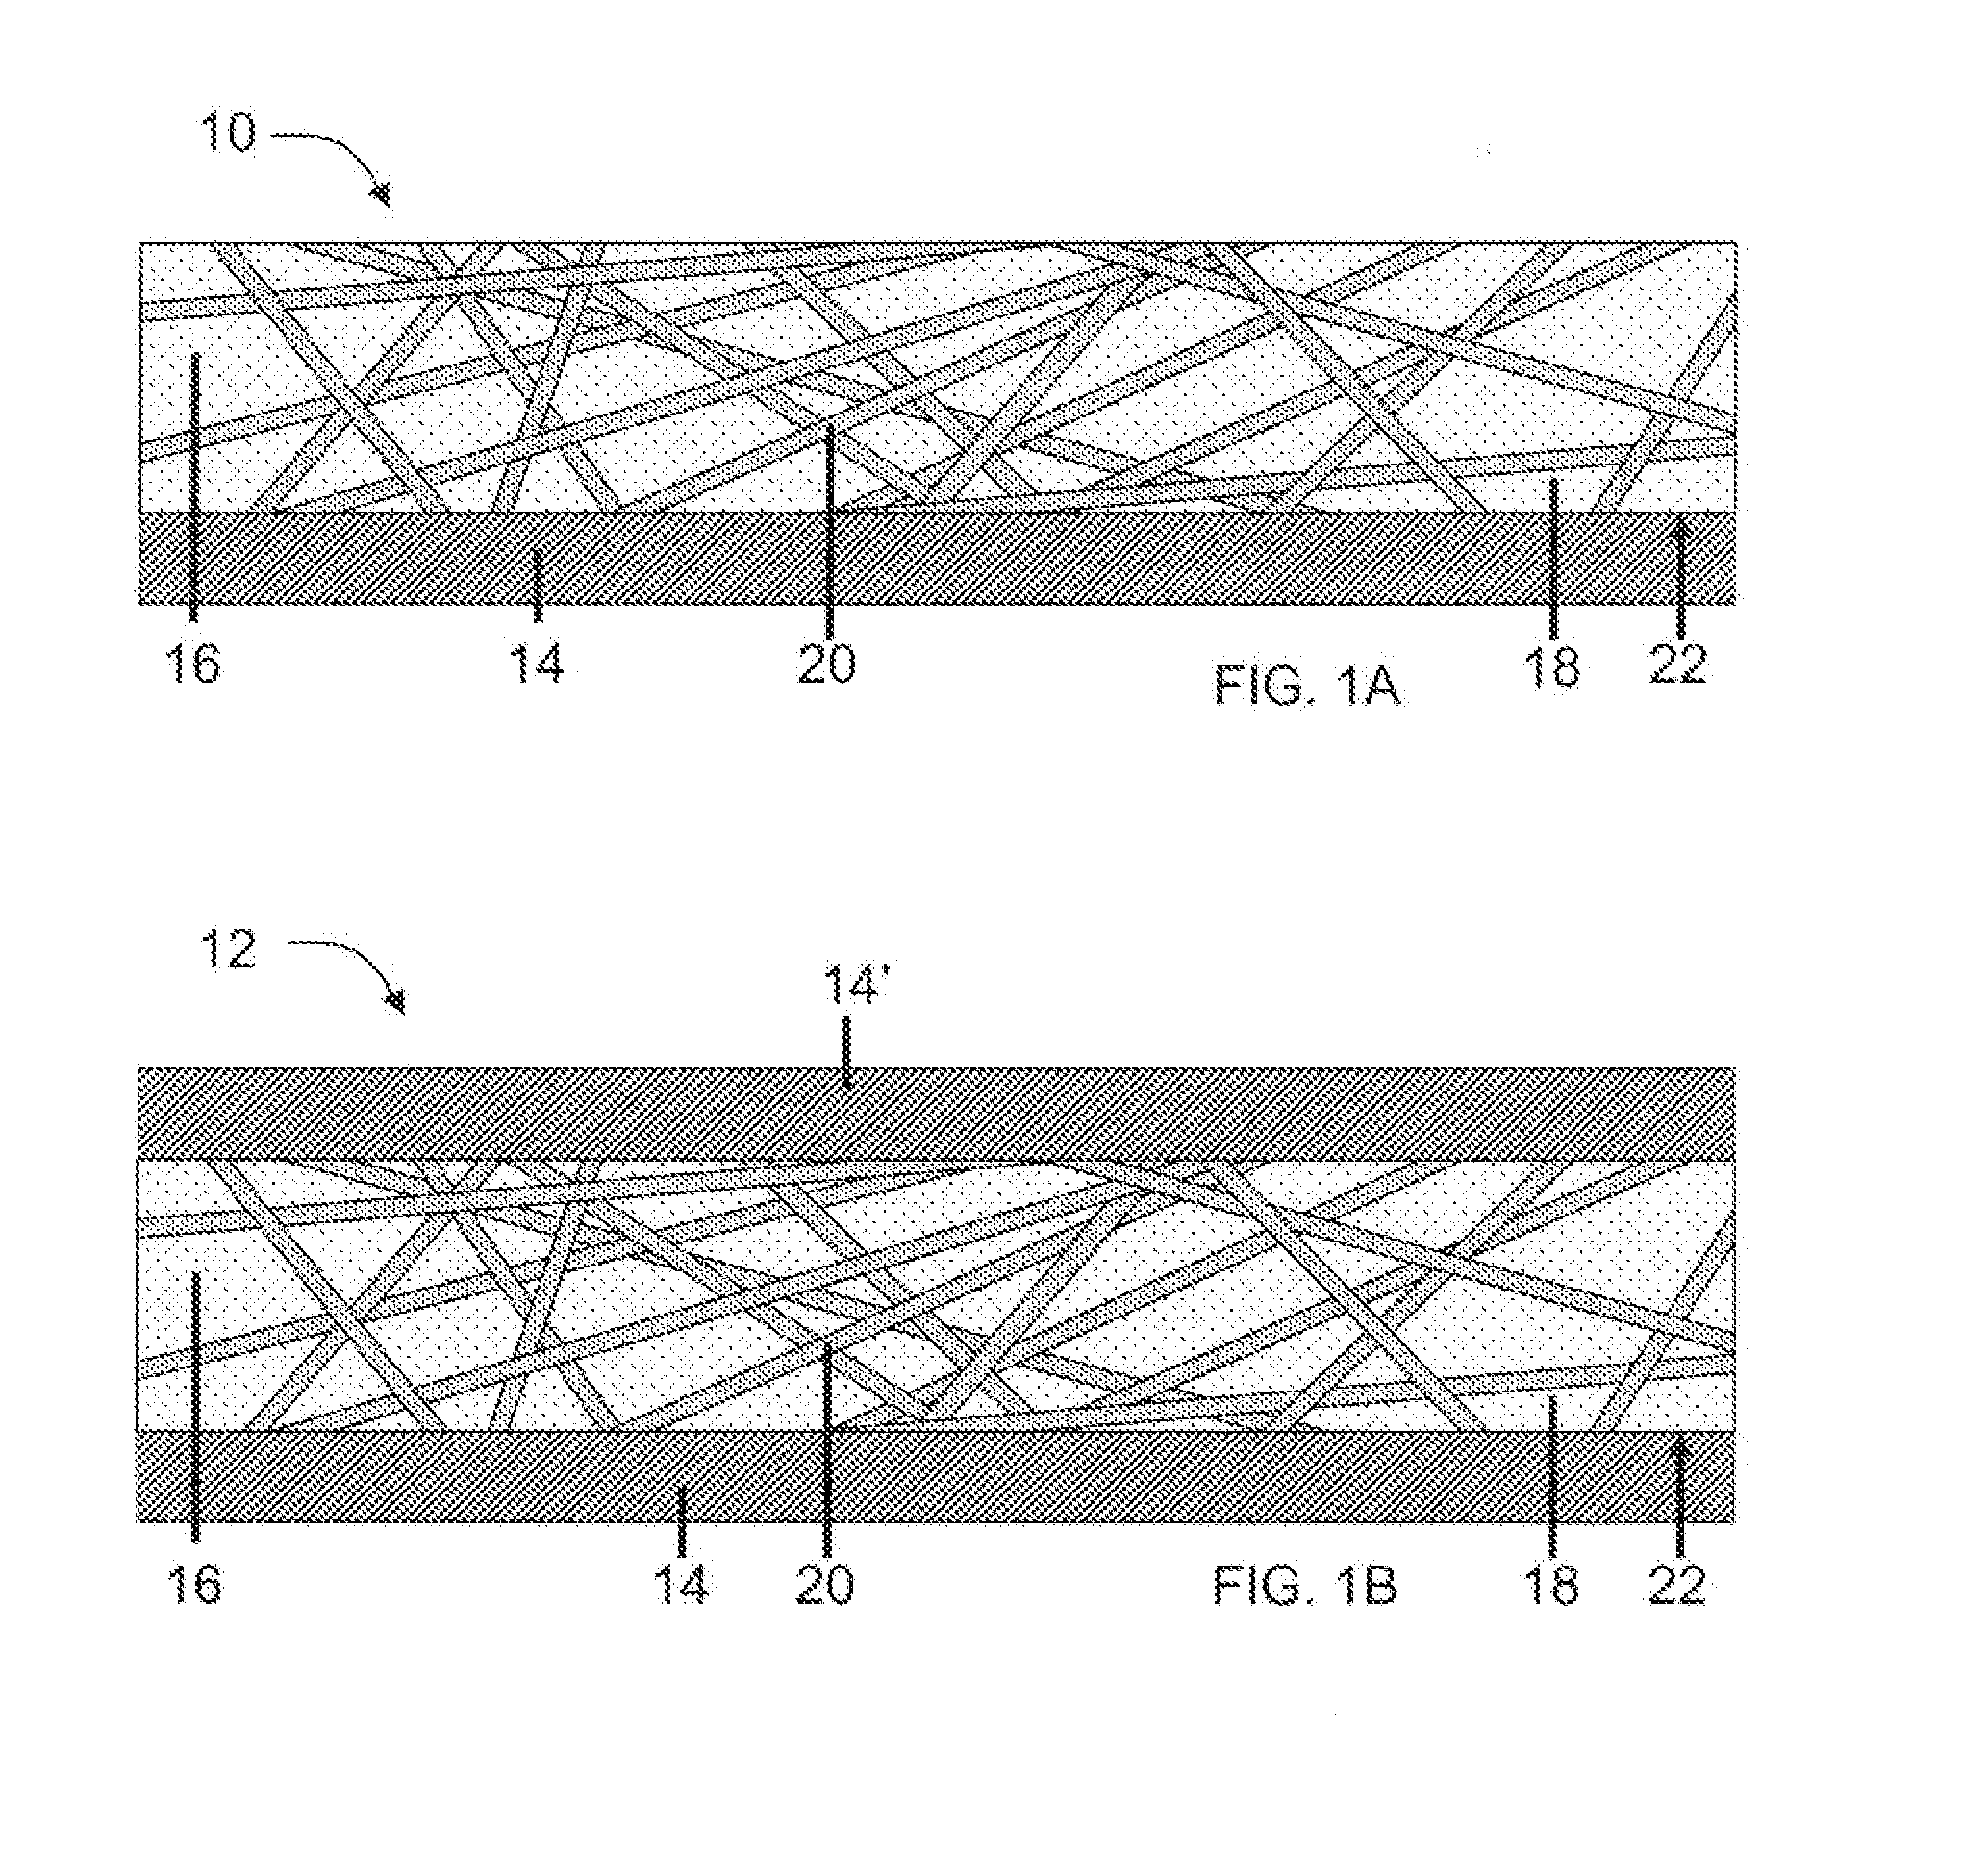 Formable light weight composite material systems and methods